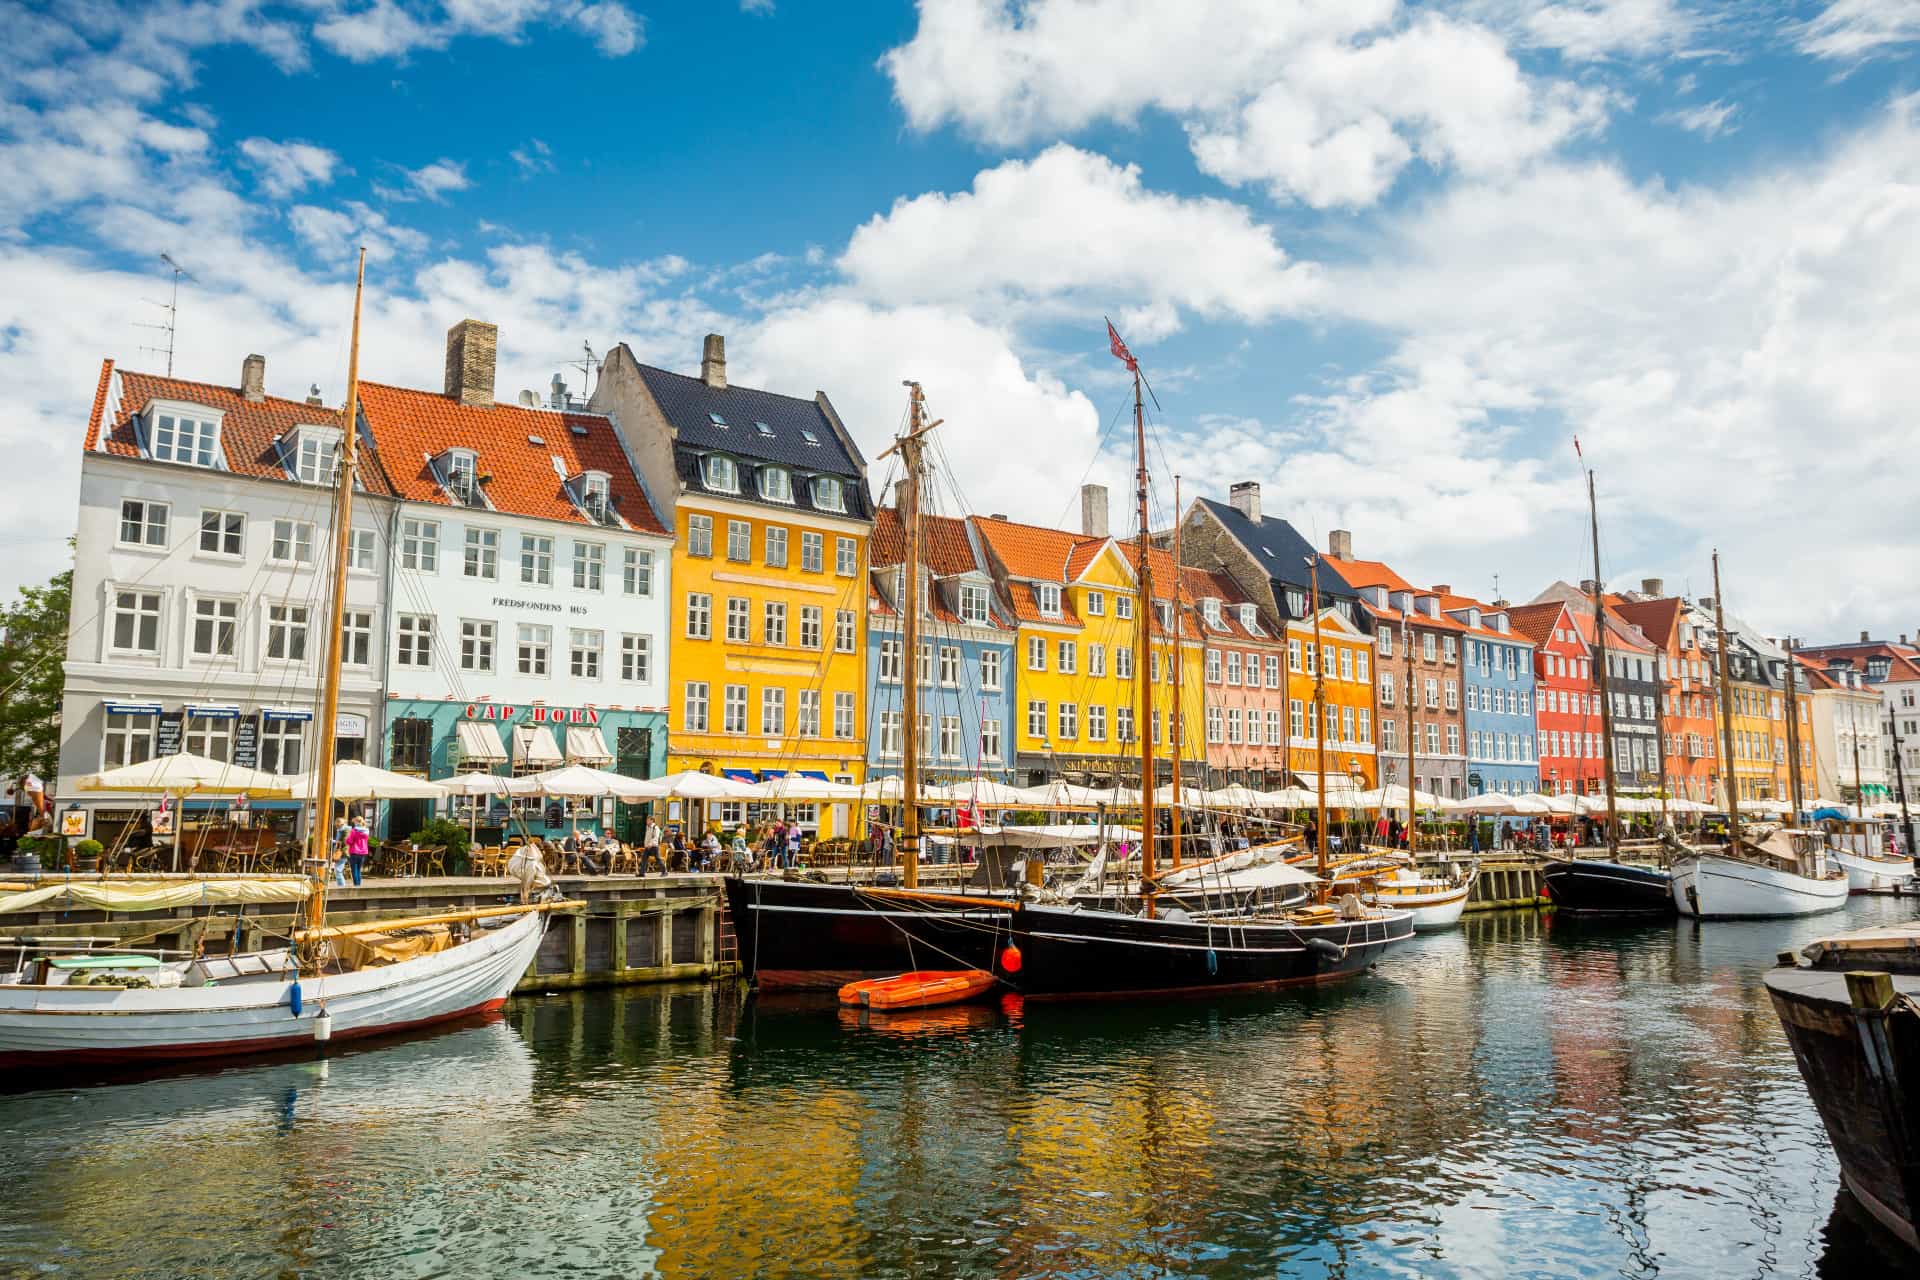 Like the rest of Scandinavia, the Danish are extremely well versed in American culture. They also speak English fluently, which makes traveling through Denmark super easy for Americans.